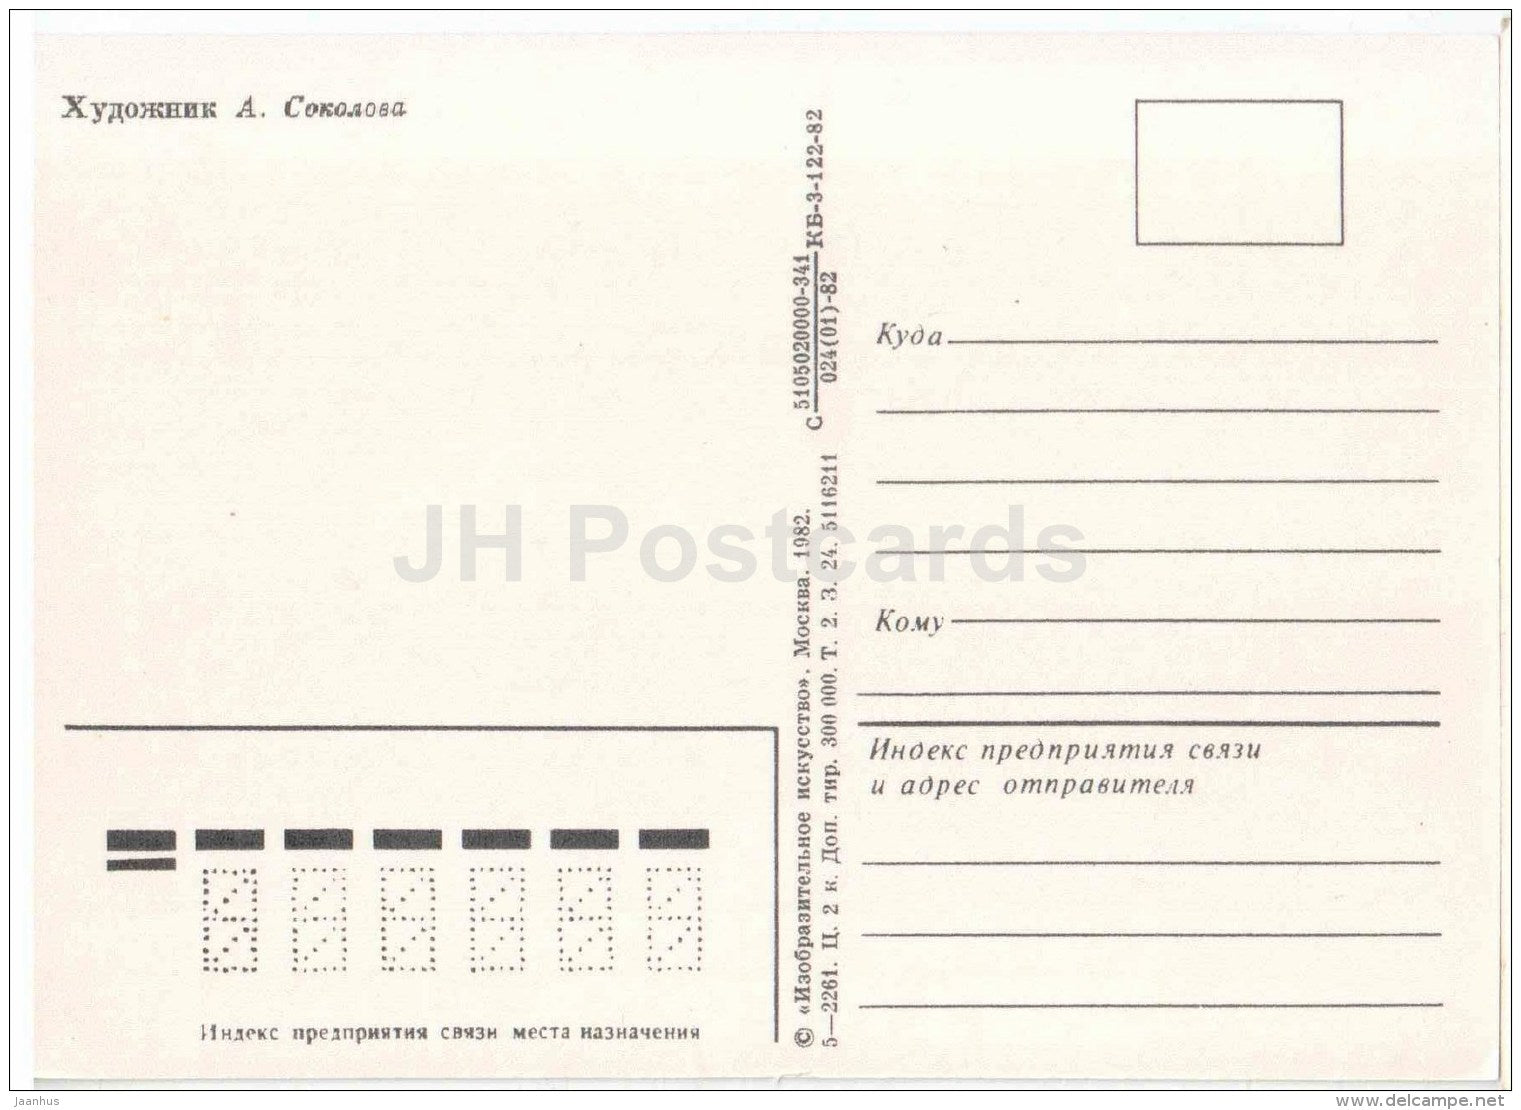 illustration by A. Sokolova - Buckthorn - Beginning of the school year - 1982 - Russia USSR - unused - JH Postcards